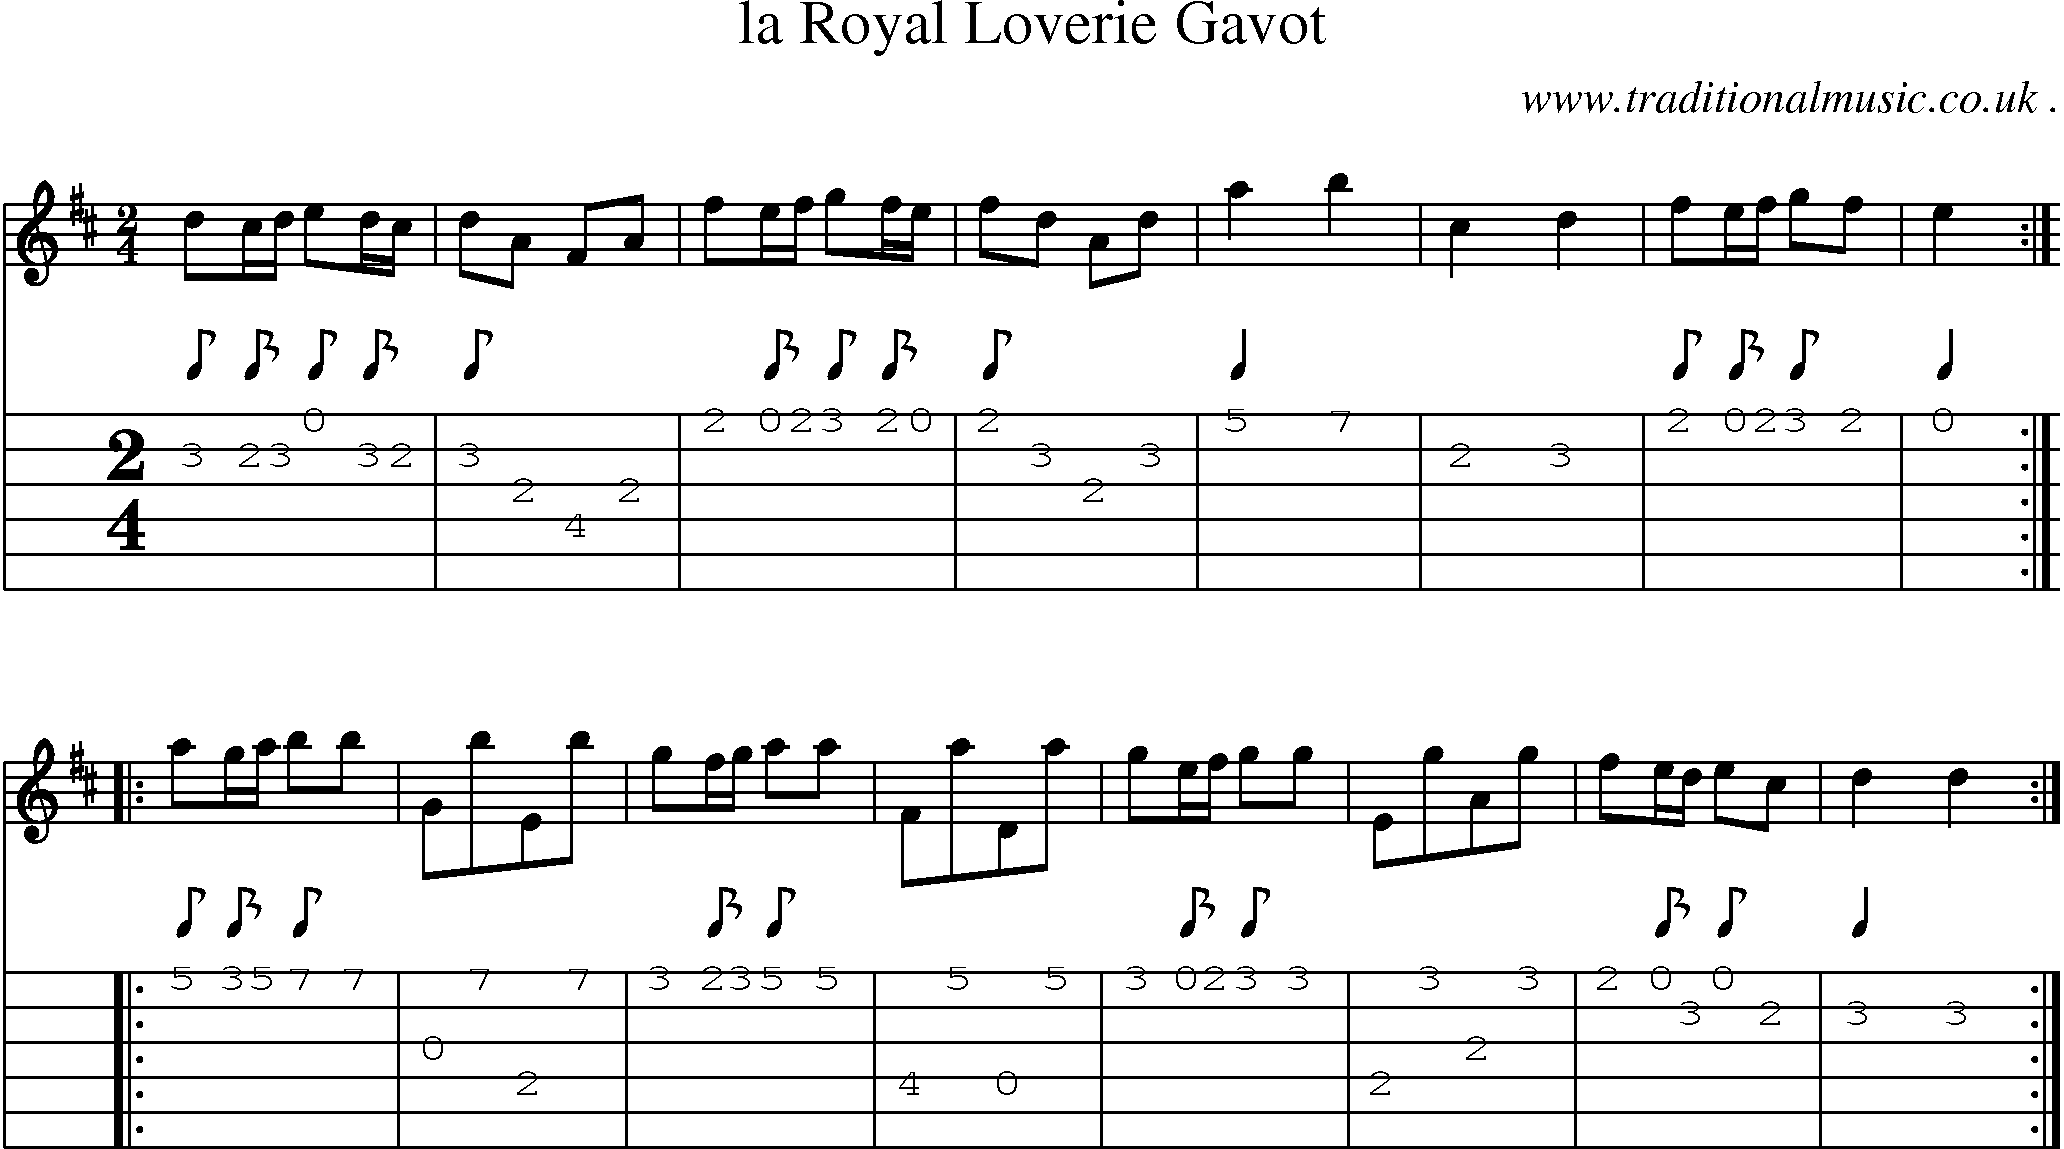 Sheet-Music and Guitar Tabs for La Royal Loverie Gavot